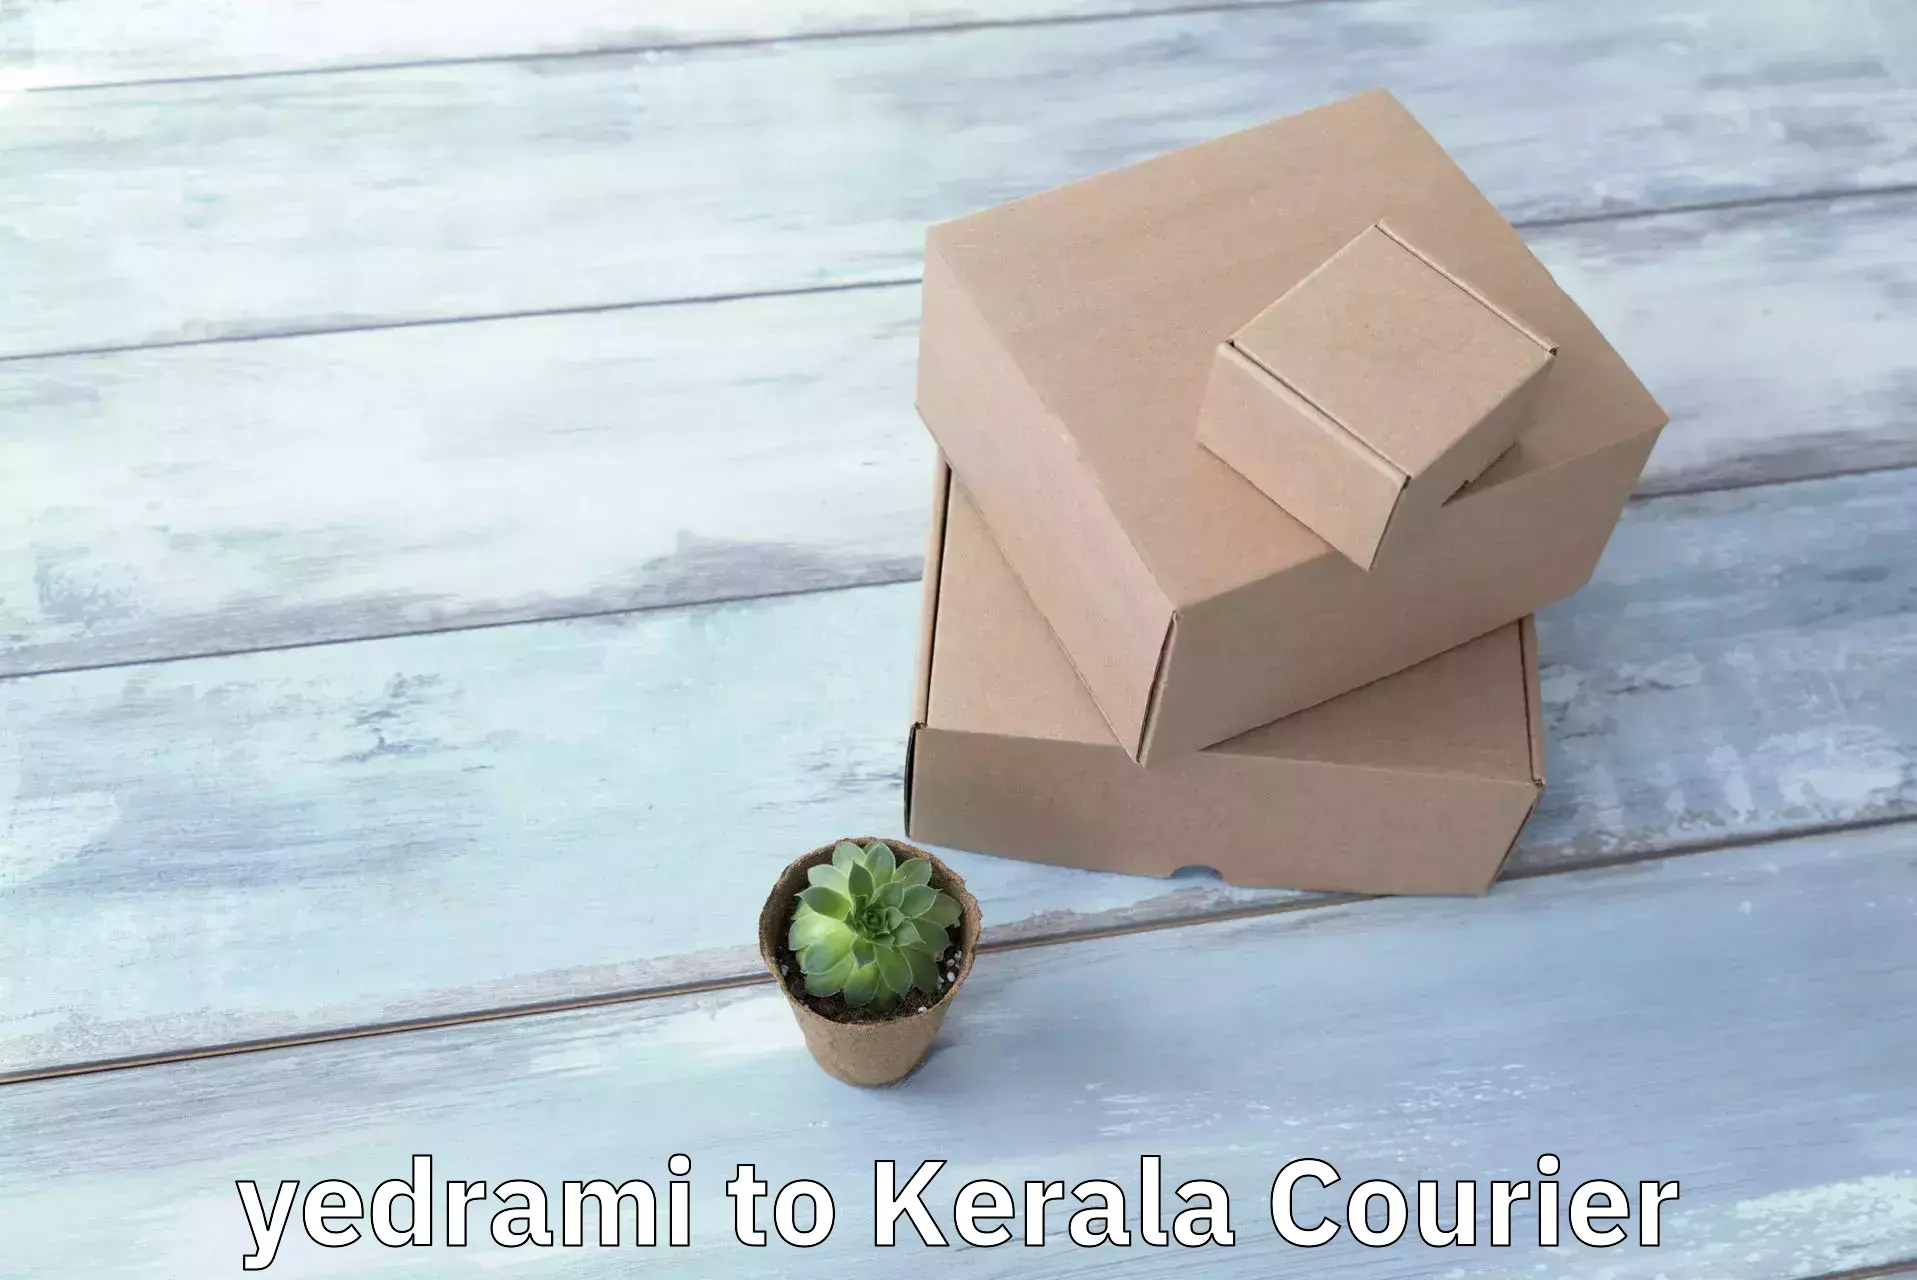 Express package delivery yedrami to Kalluvathukkal